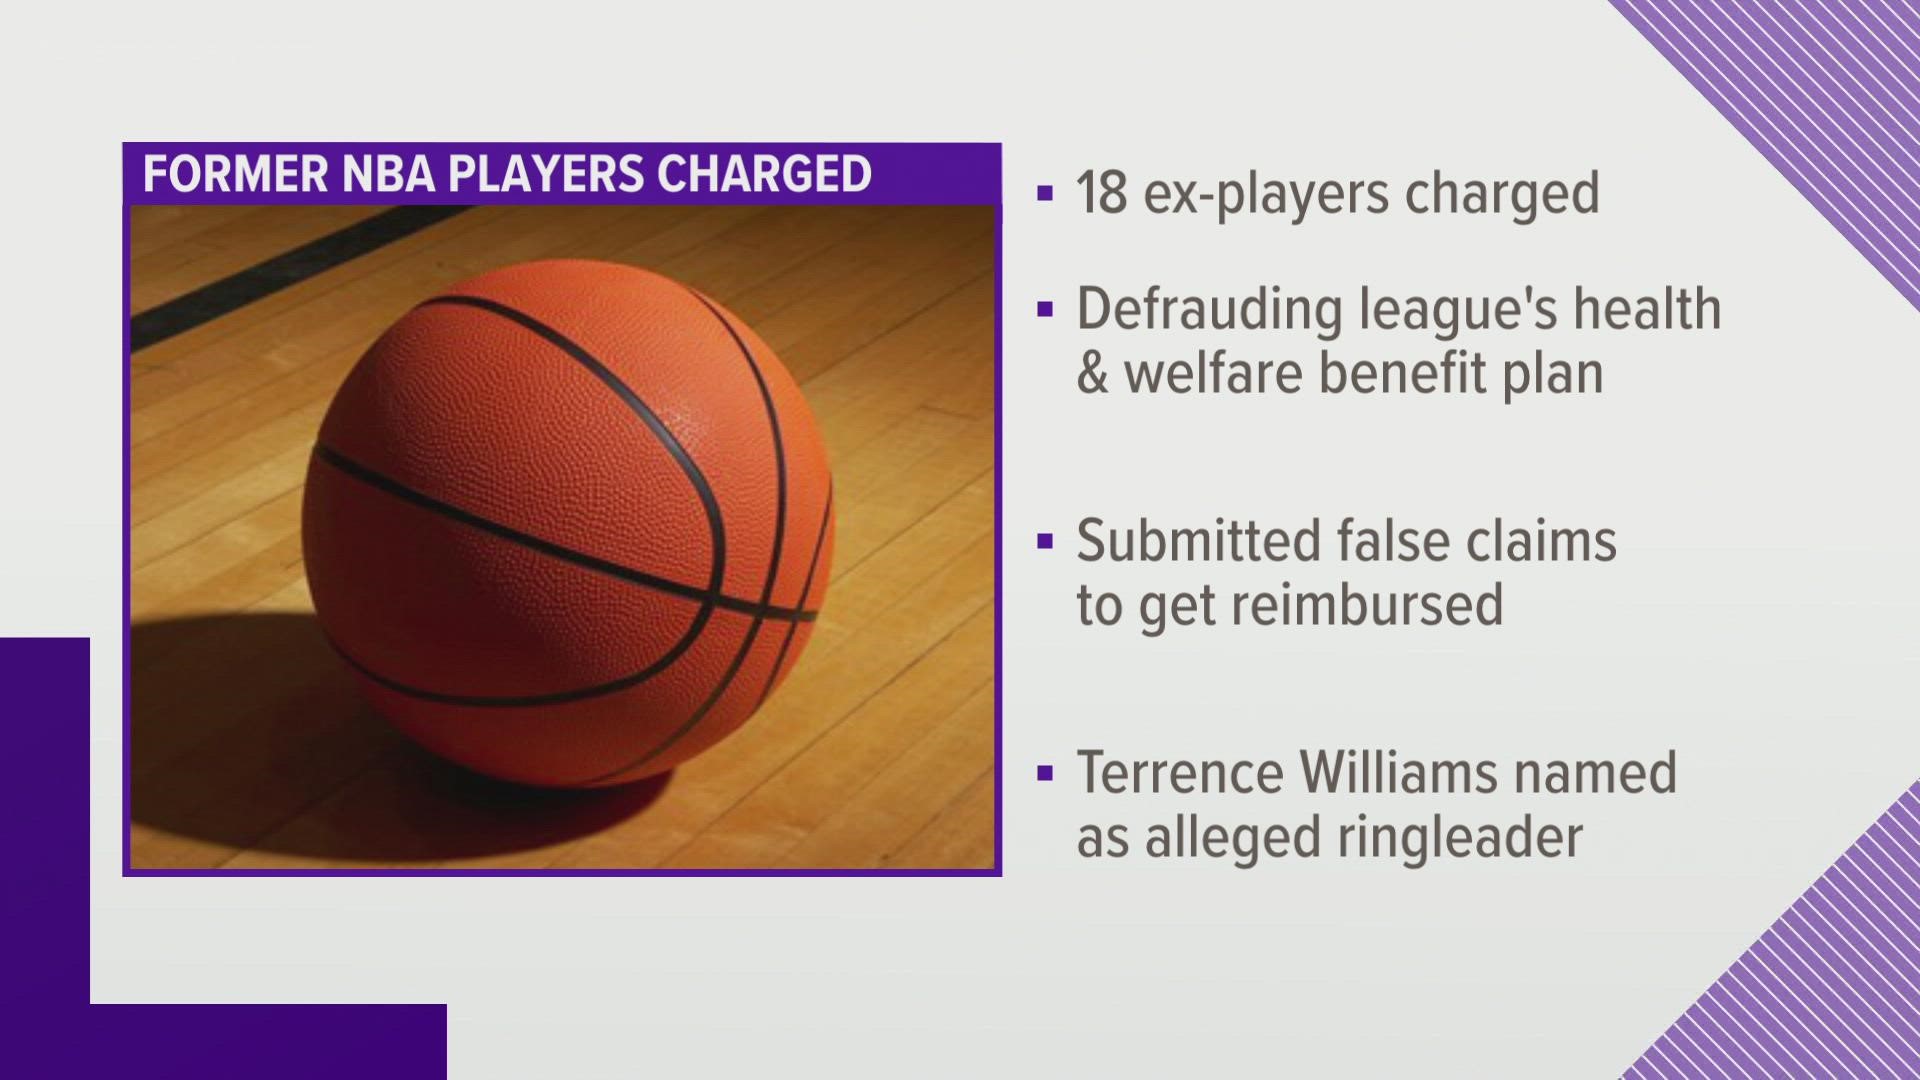 The indictment said the ex-players submitted false and fraudulent claims for reimbursement of medical and dental expenses that were never incurred.